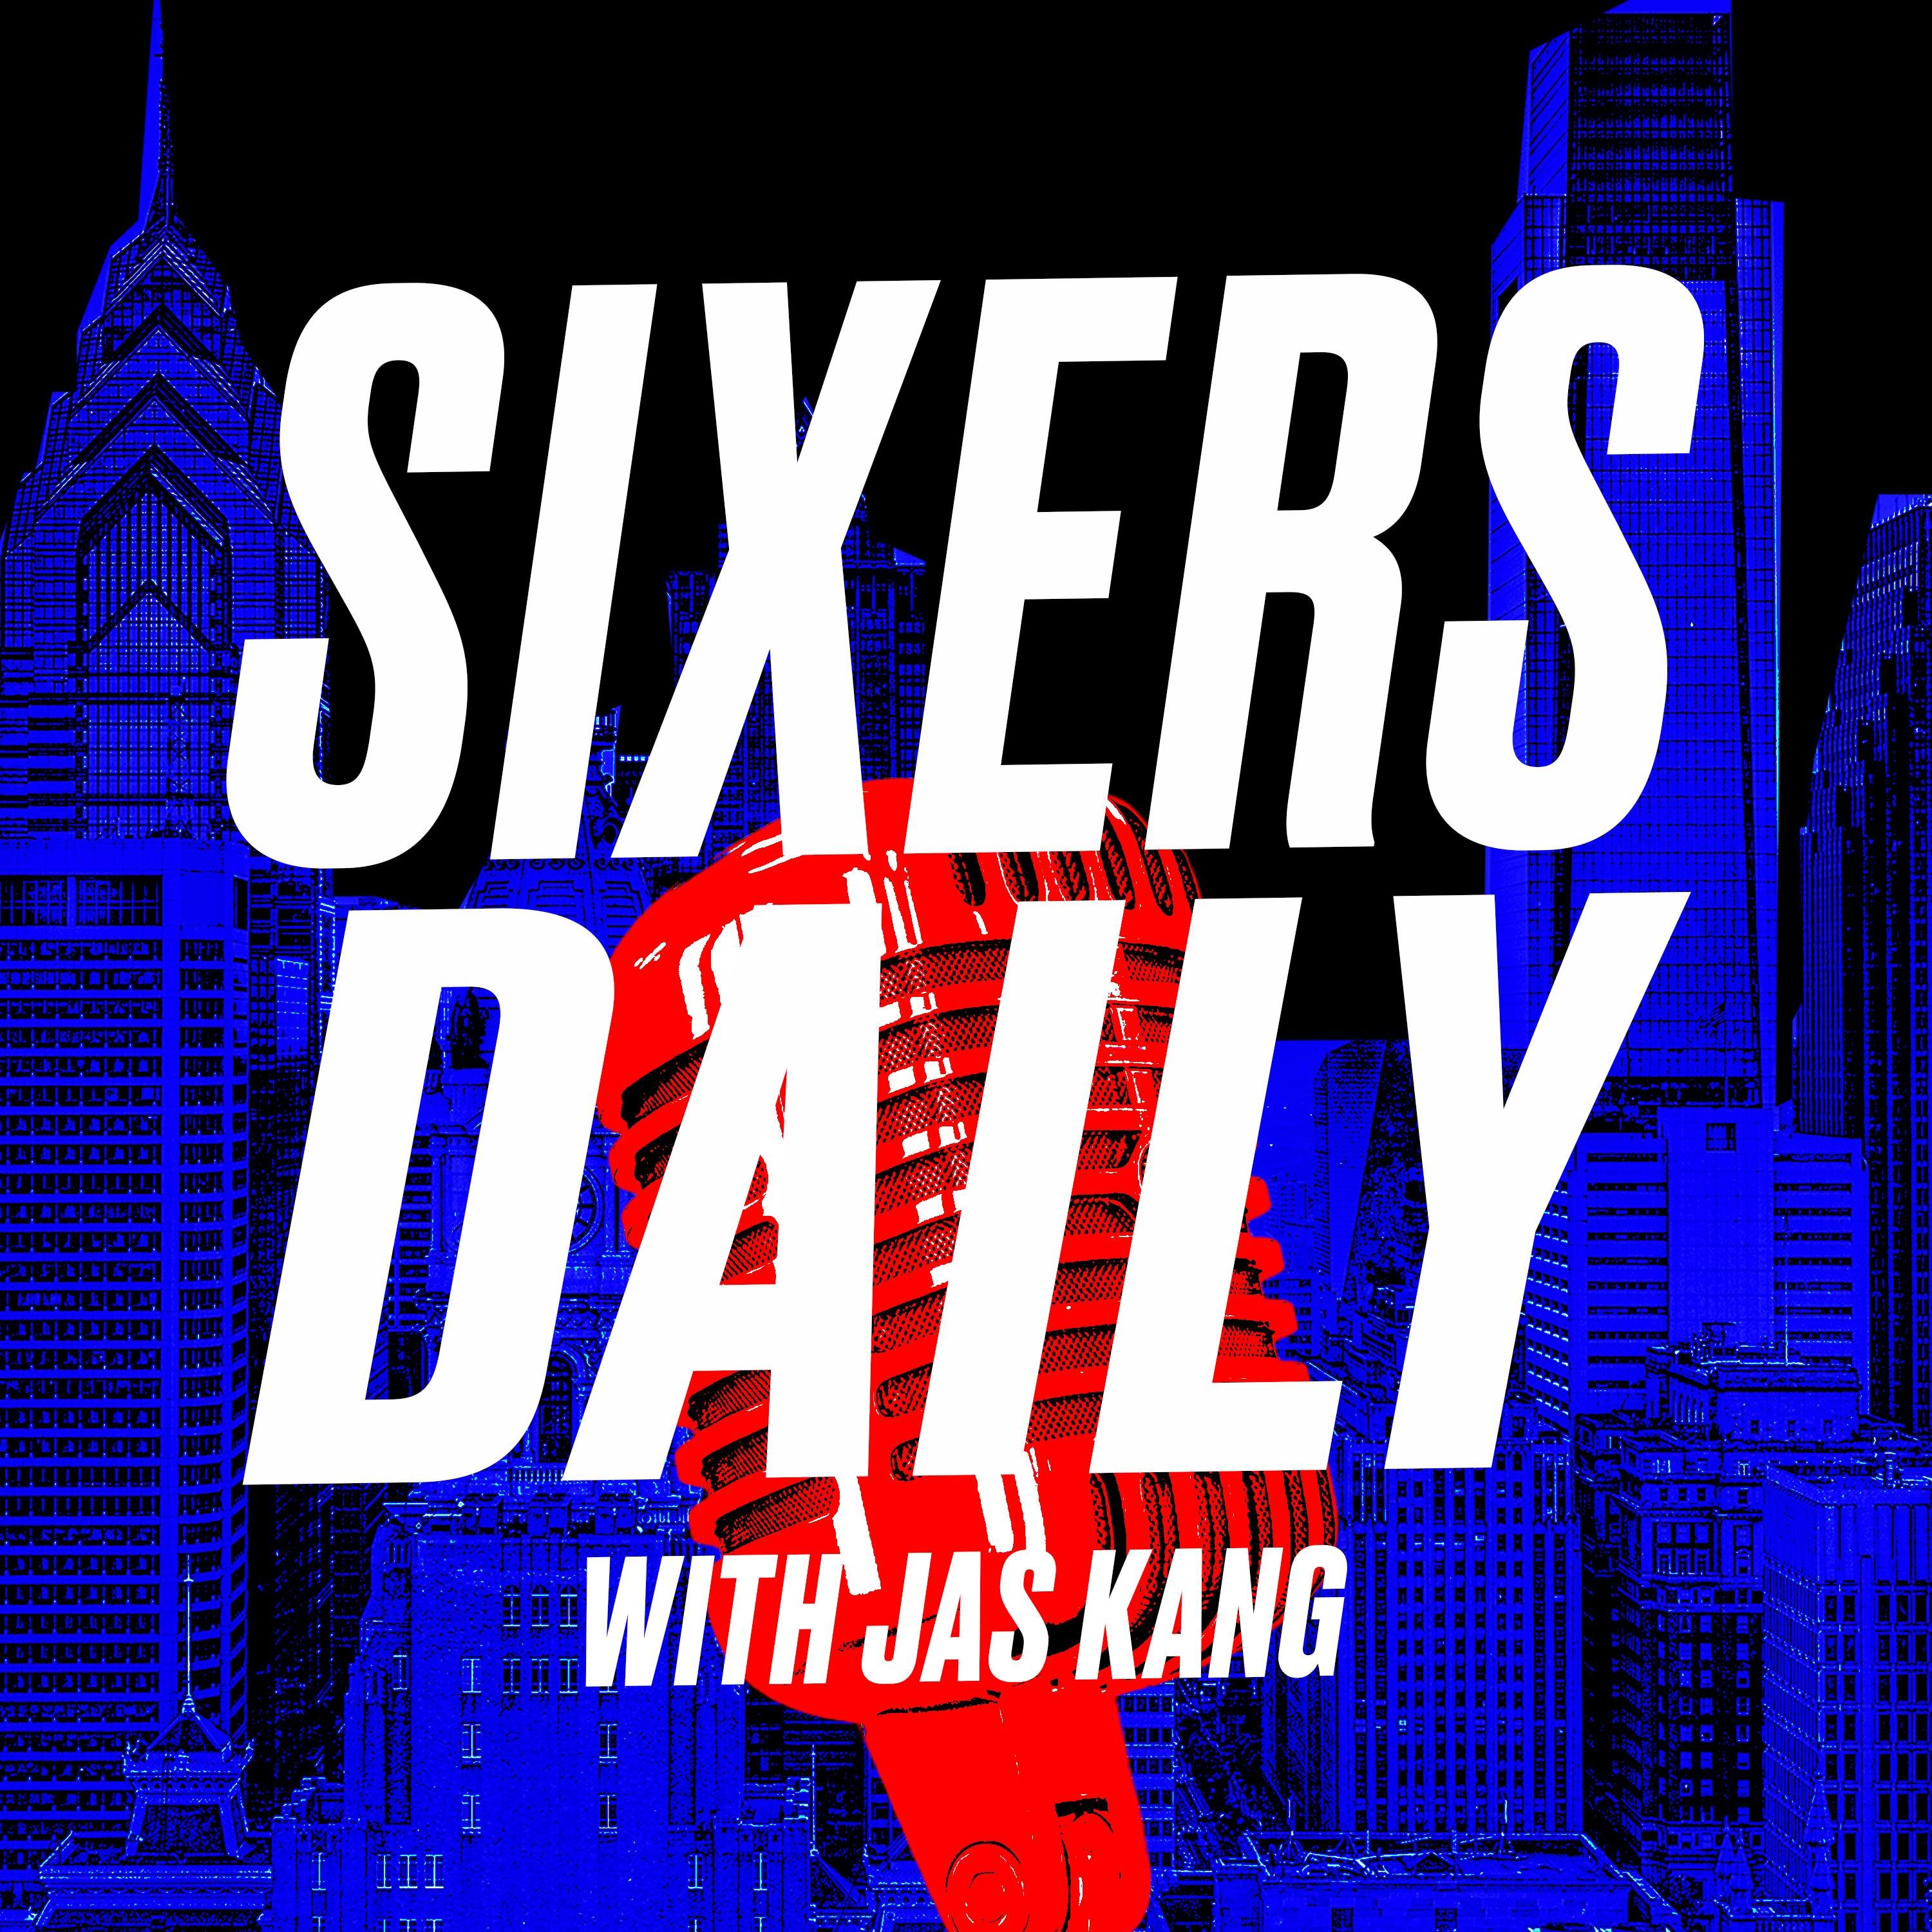 Sixers Daily with Jas Kang - Paul Hudrick on the Doc Rivers potentially going to the Lakers, Mattise Thybulle's future in Philly, Tyrese Maxey's value and Tobias Harris trade talk